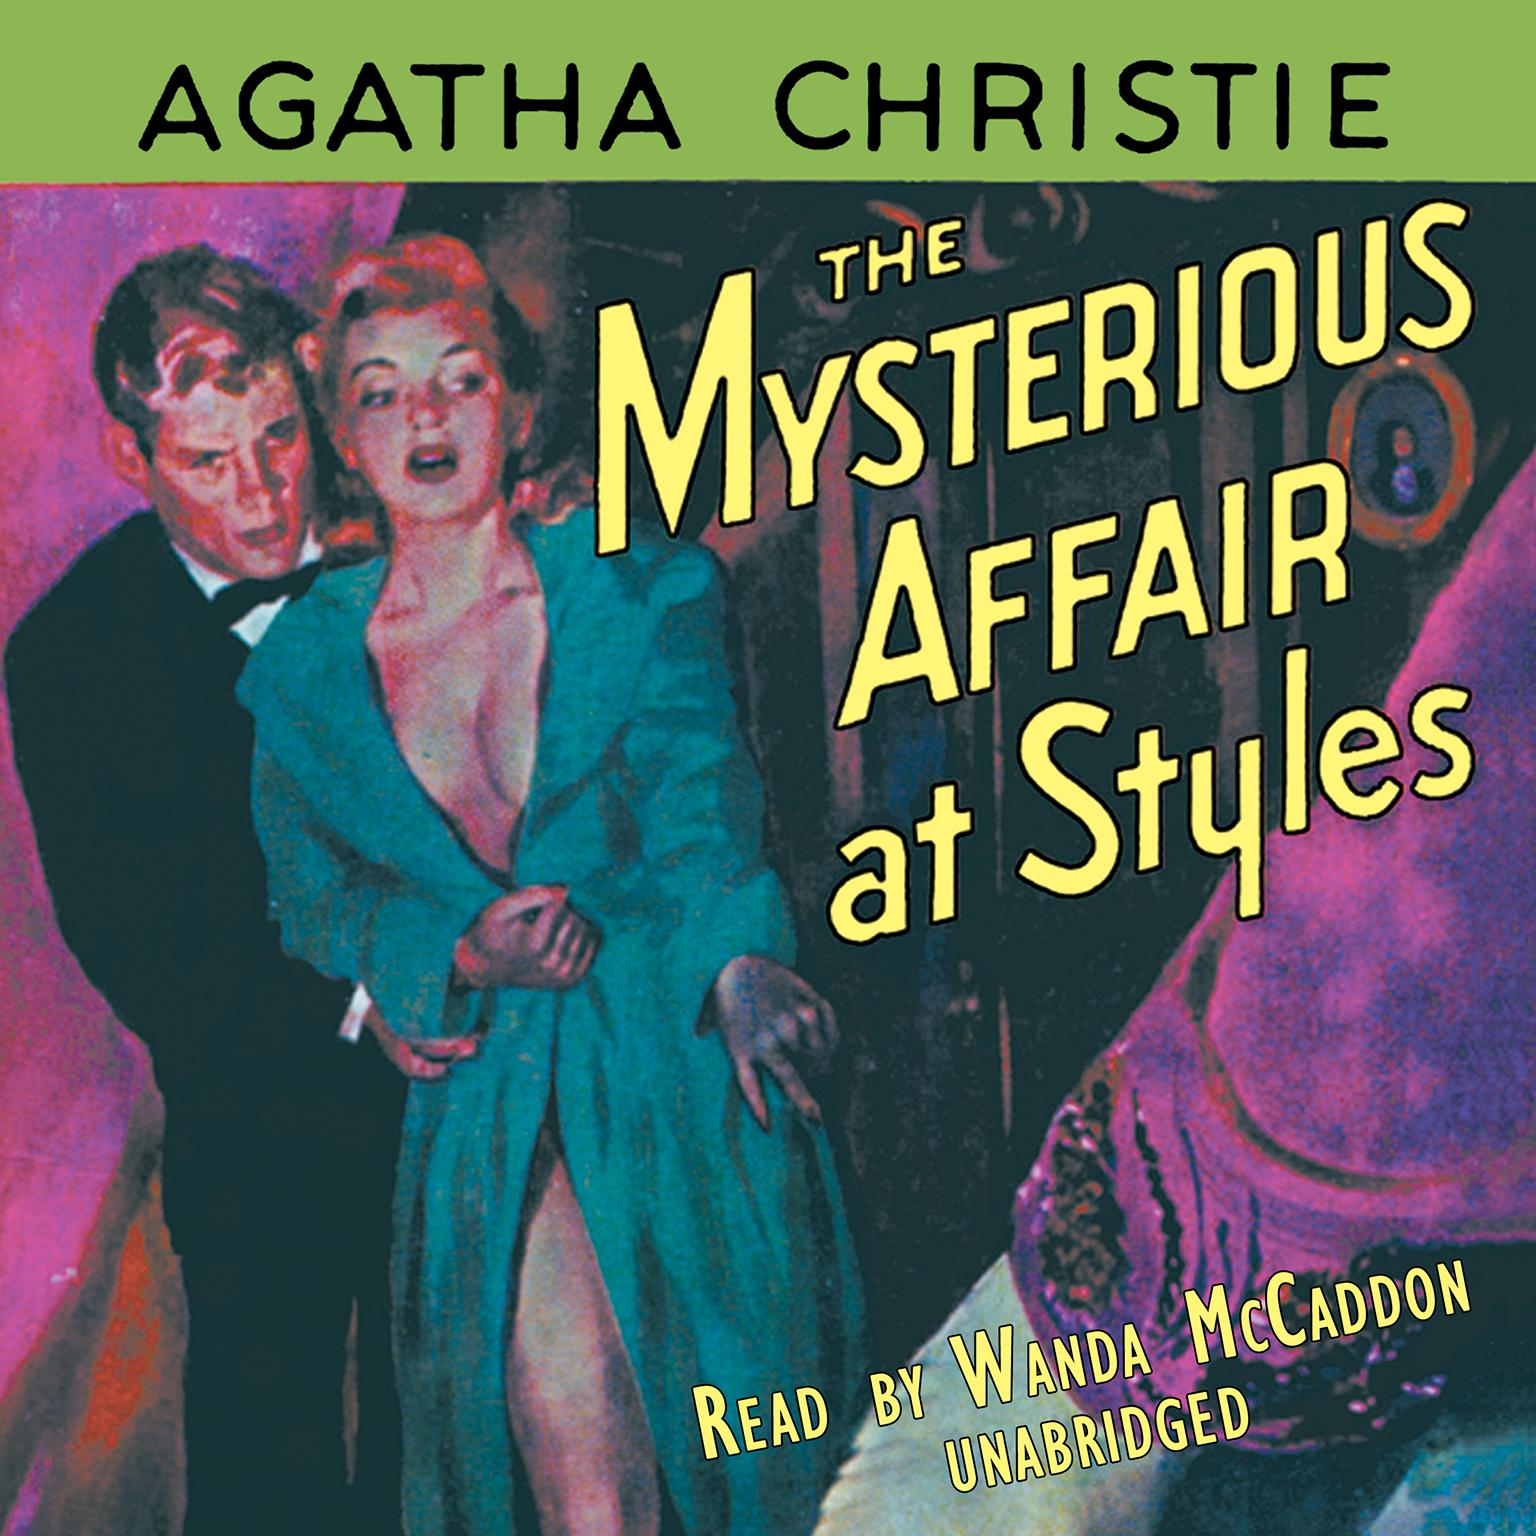 The Mysterious Affair at Styles Audiobook, by Agatha Christie